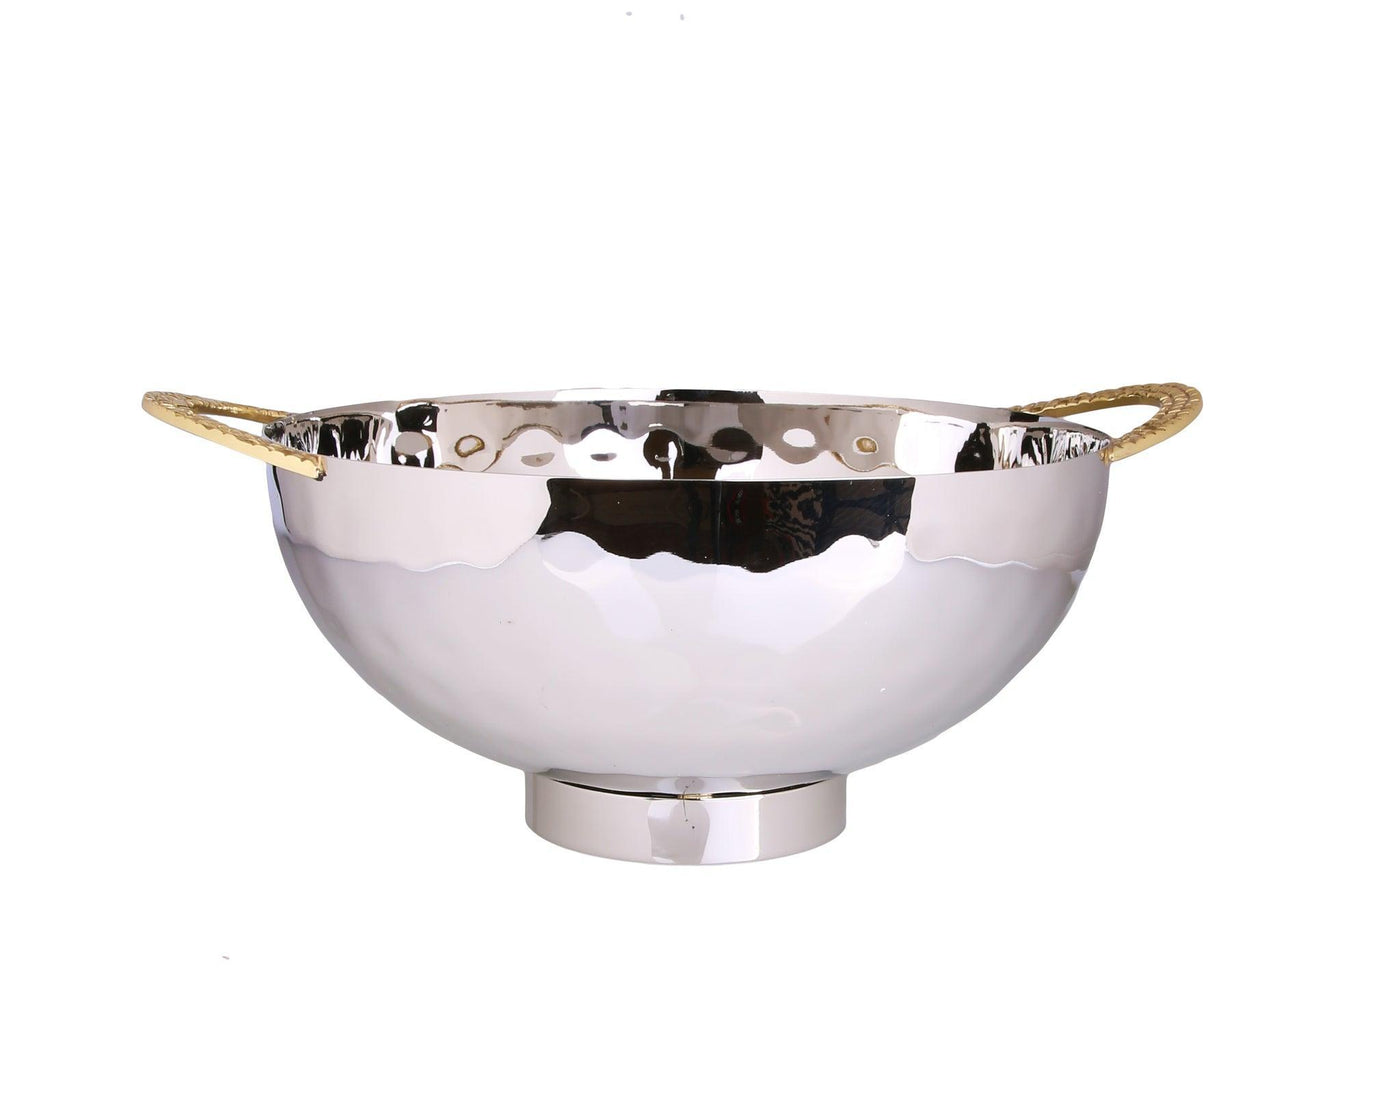 Stainless Steel Salad Bowl with Mosaic Handles - 12.5"W x 10"L x5.2"H - Set With Style